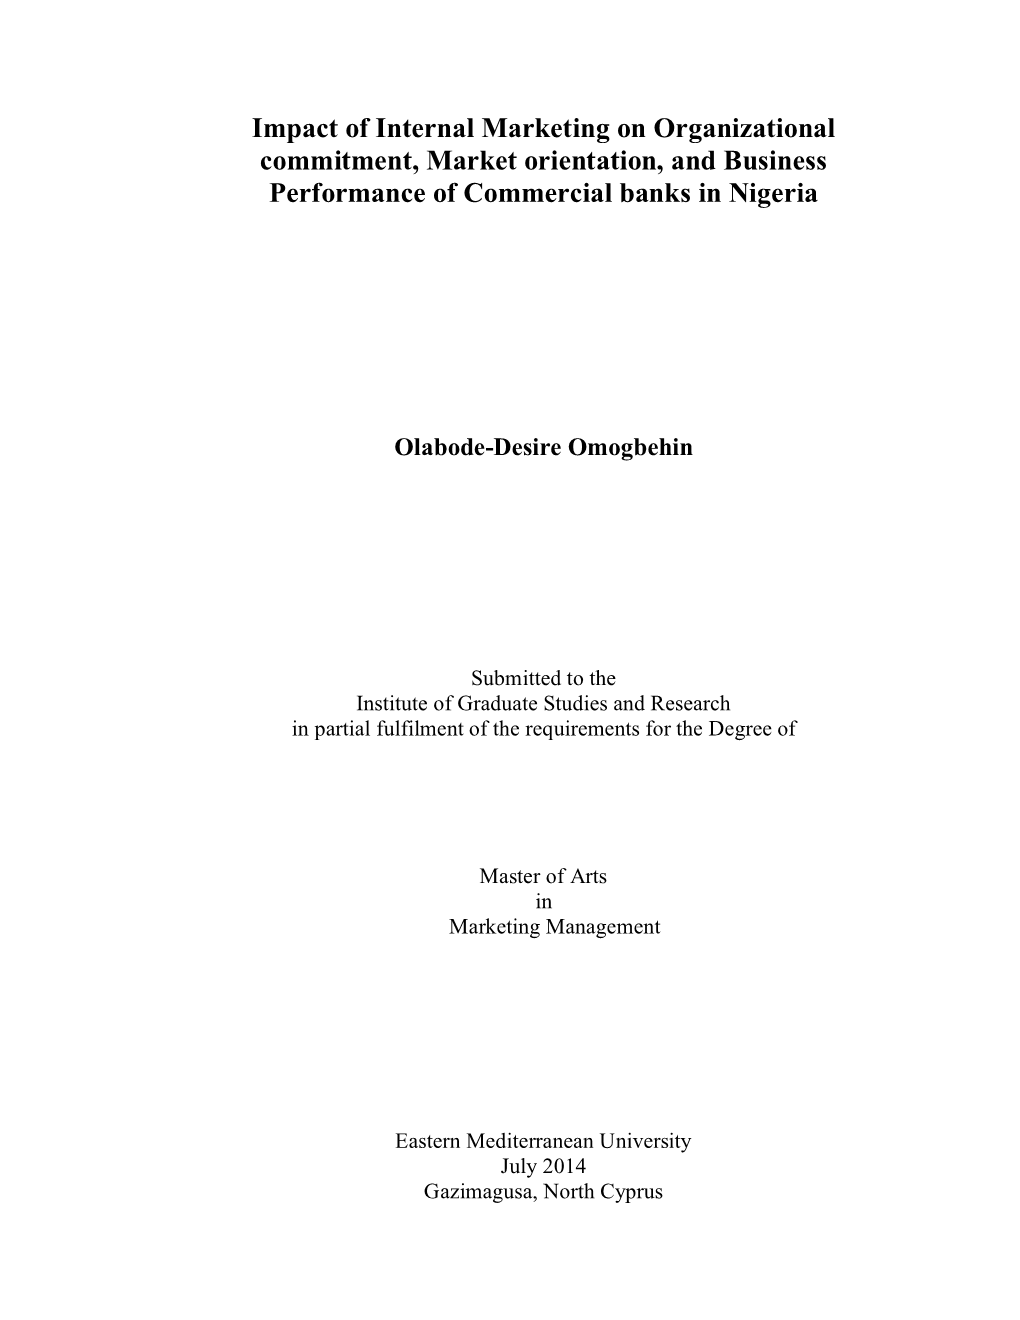 Impact of Internal Marketing on Organizational Commitment, Market Orientation, and Business Performance of Commercial Banks in Nigeria